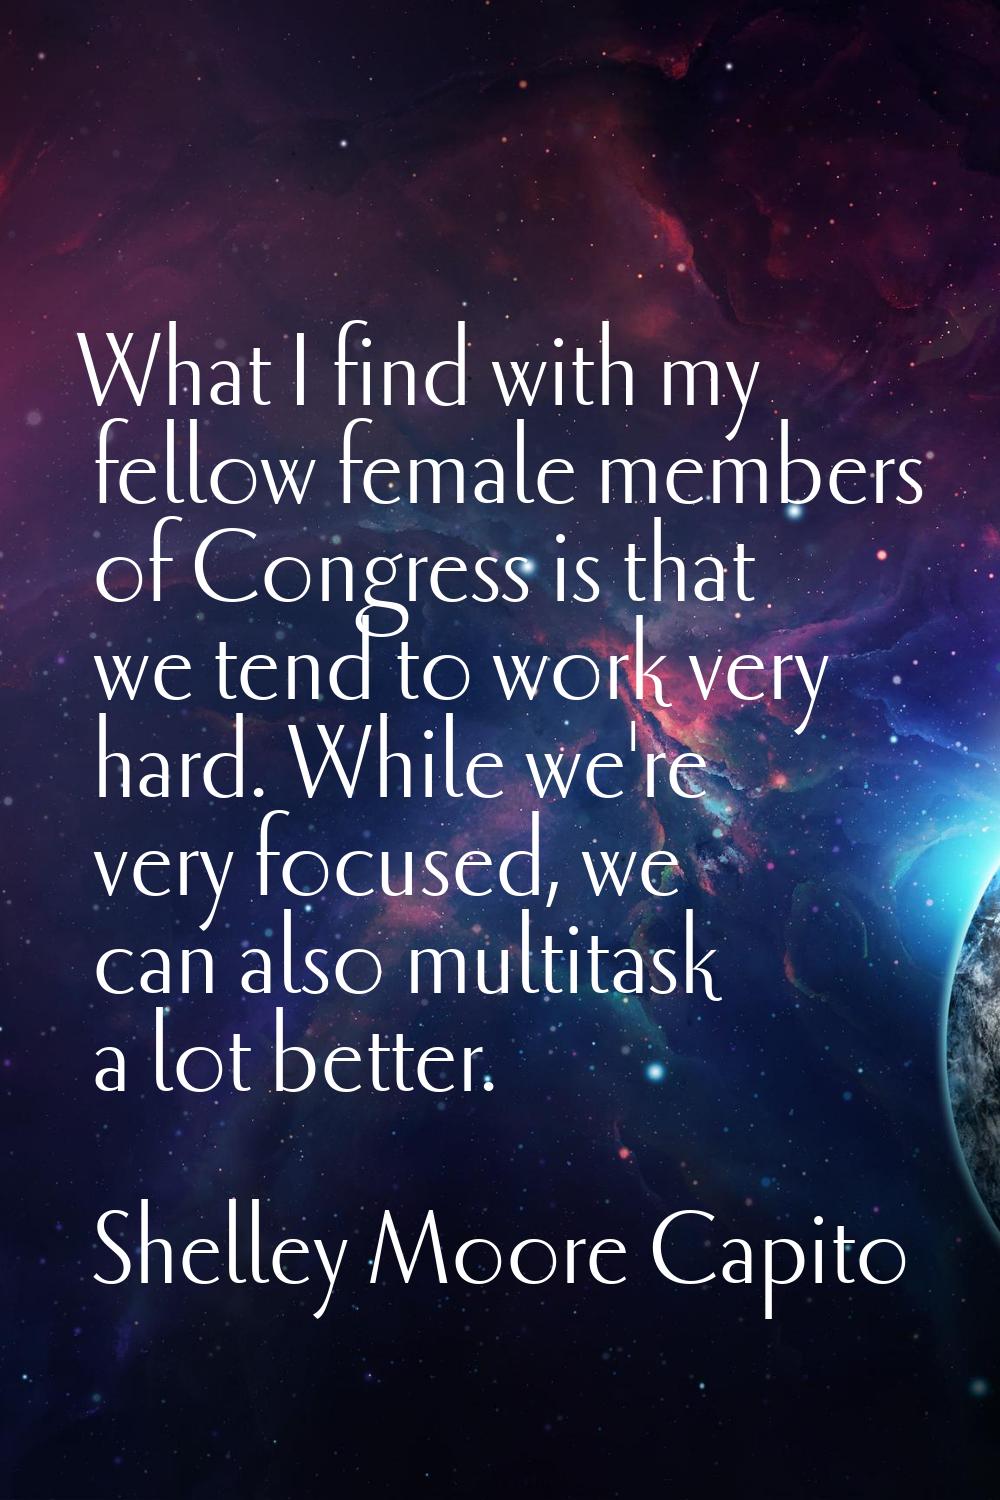 What I find with my fellow female members of Congress is that we tend to work very hard. While we'r